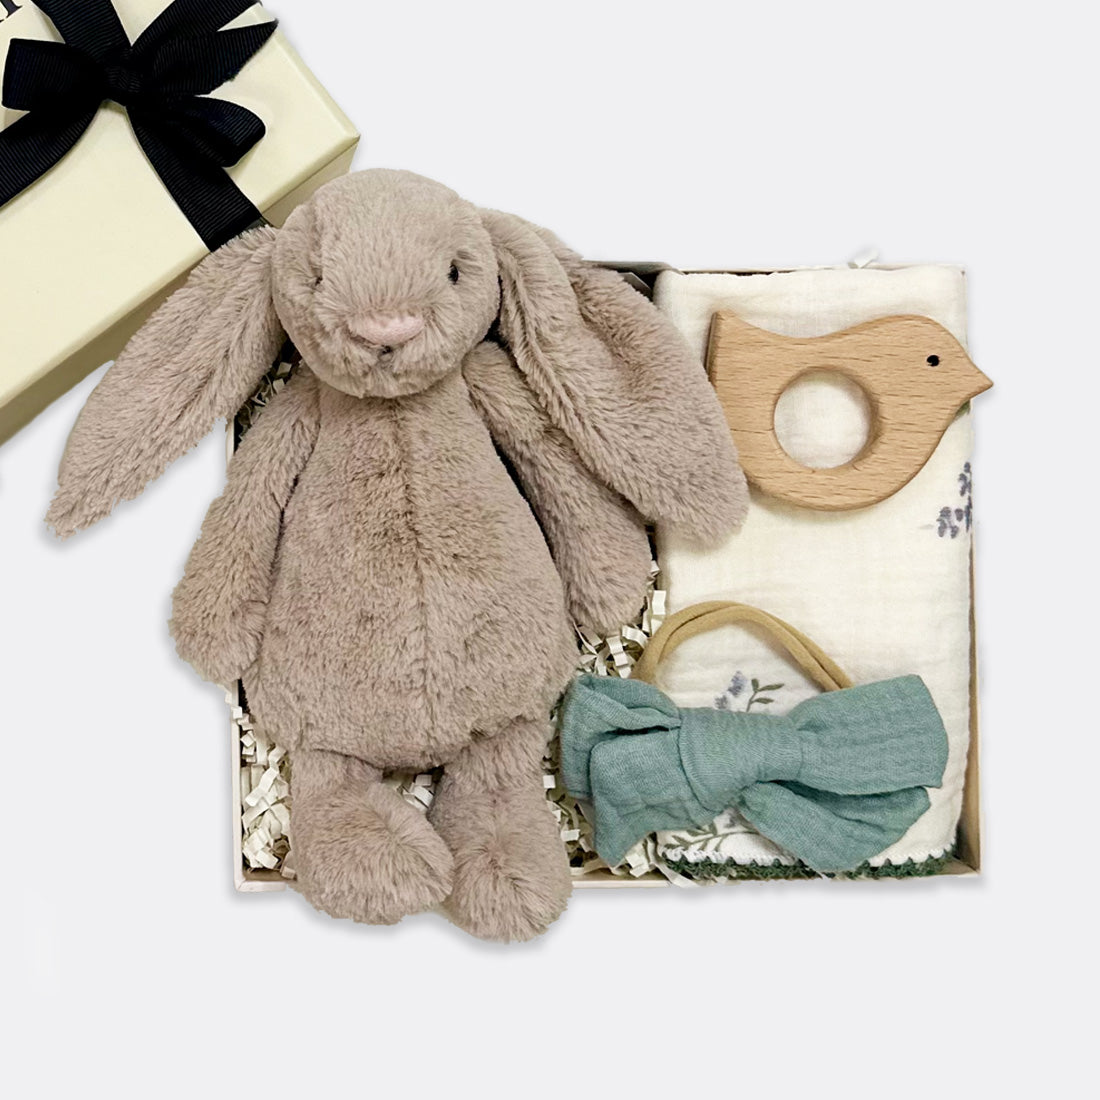 Bashful Bunny Soft Toy | Beige Bird Teether Baby Headband- Mint Cottage Chic Muslin Square , shop the best Christmas gift gifts for her for him from Inna carton online store dubai, UAE!